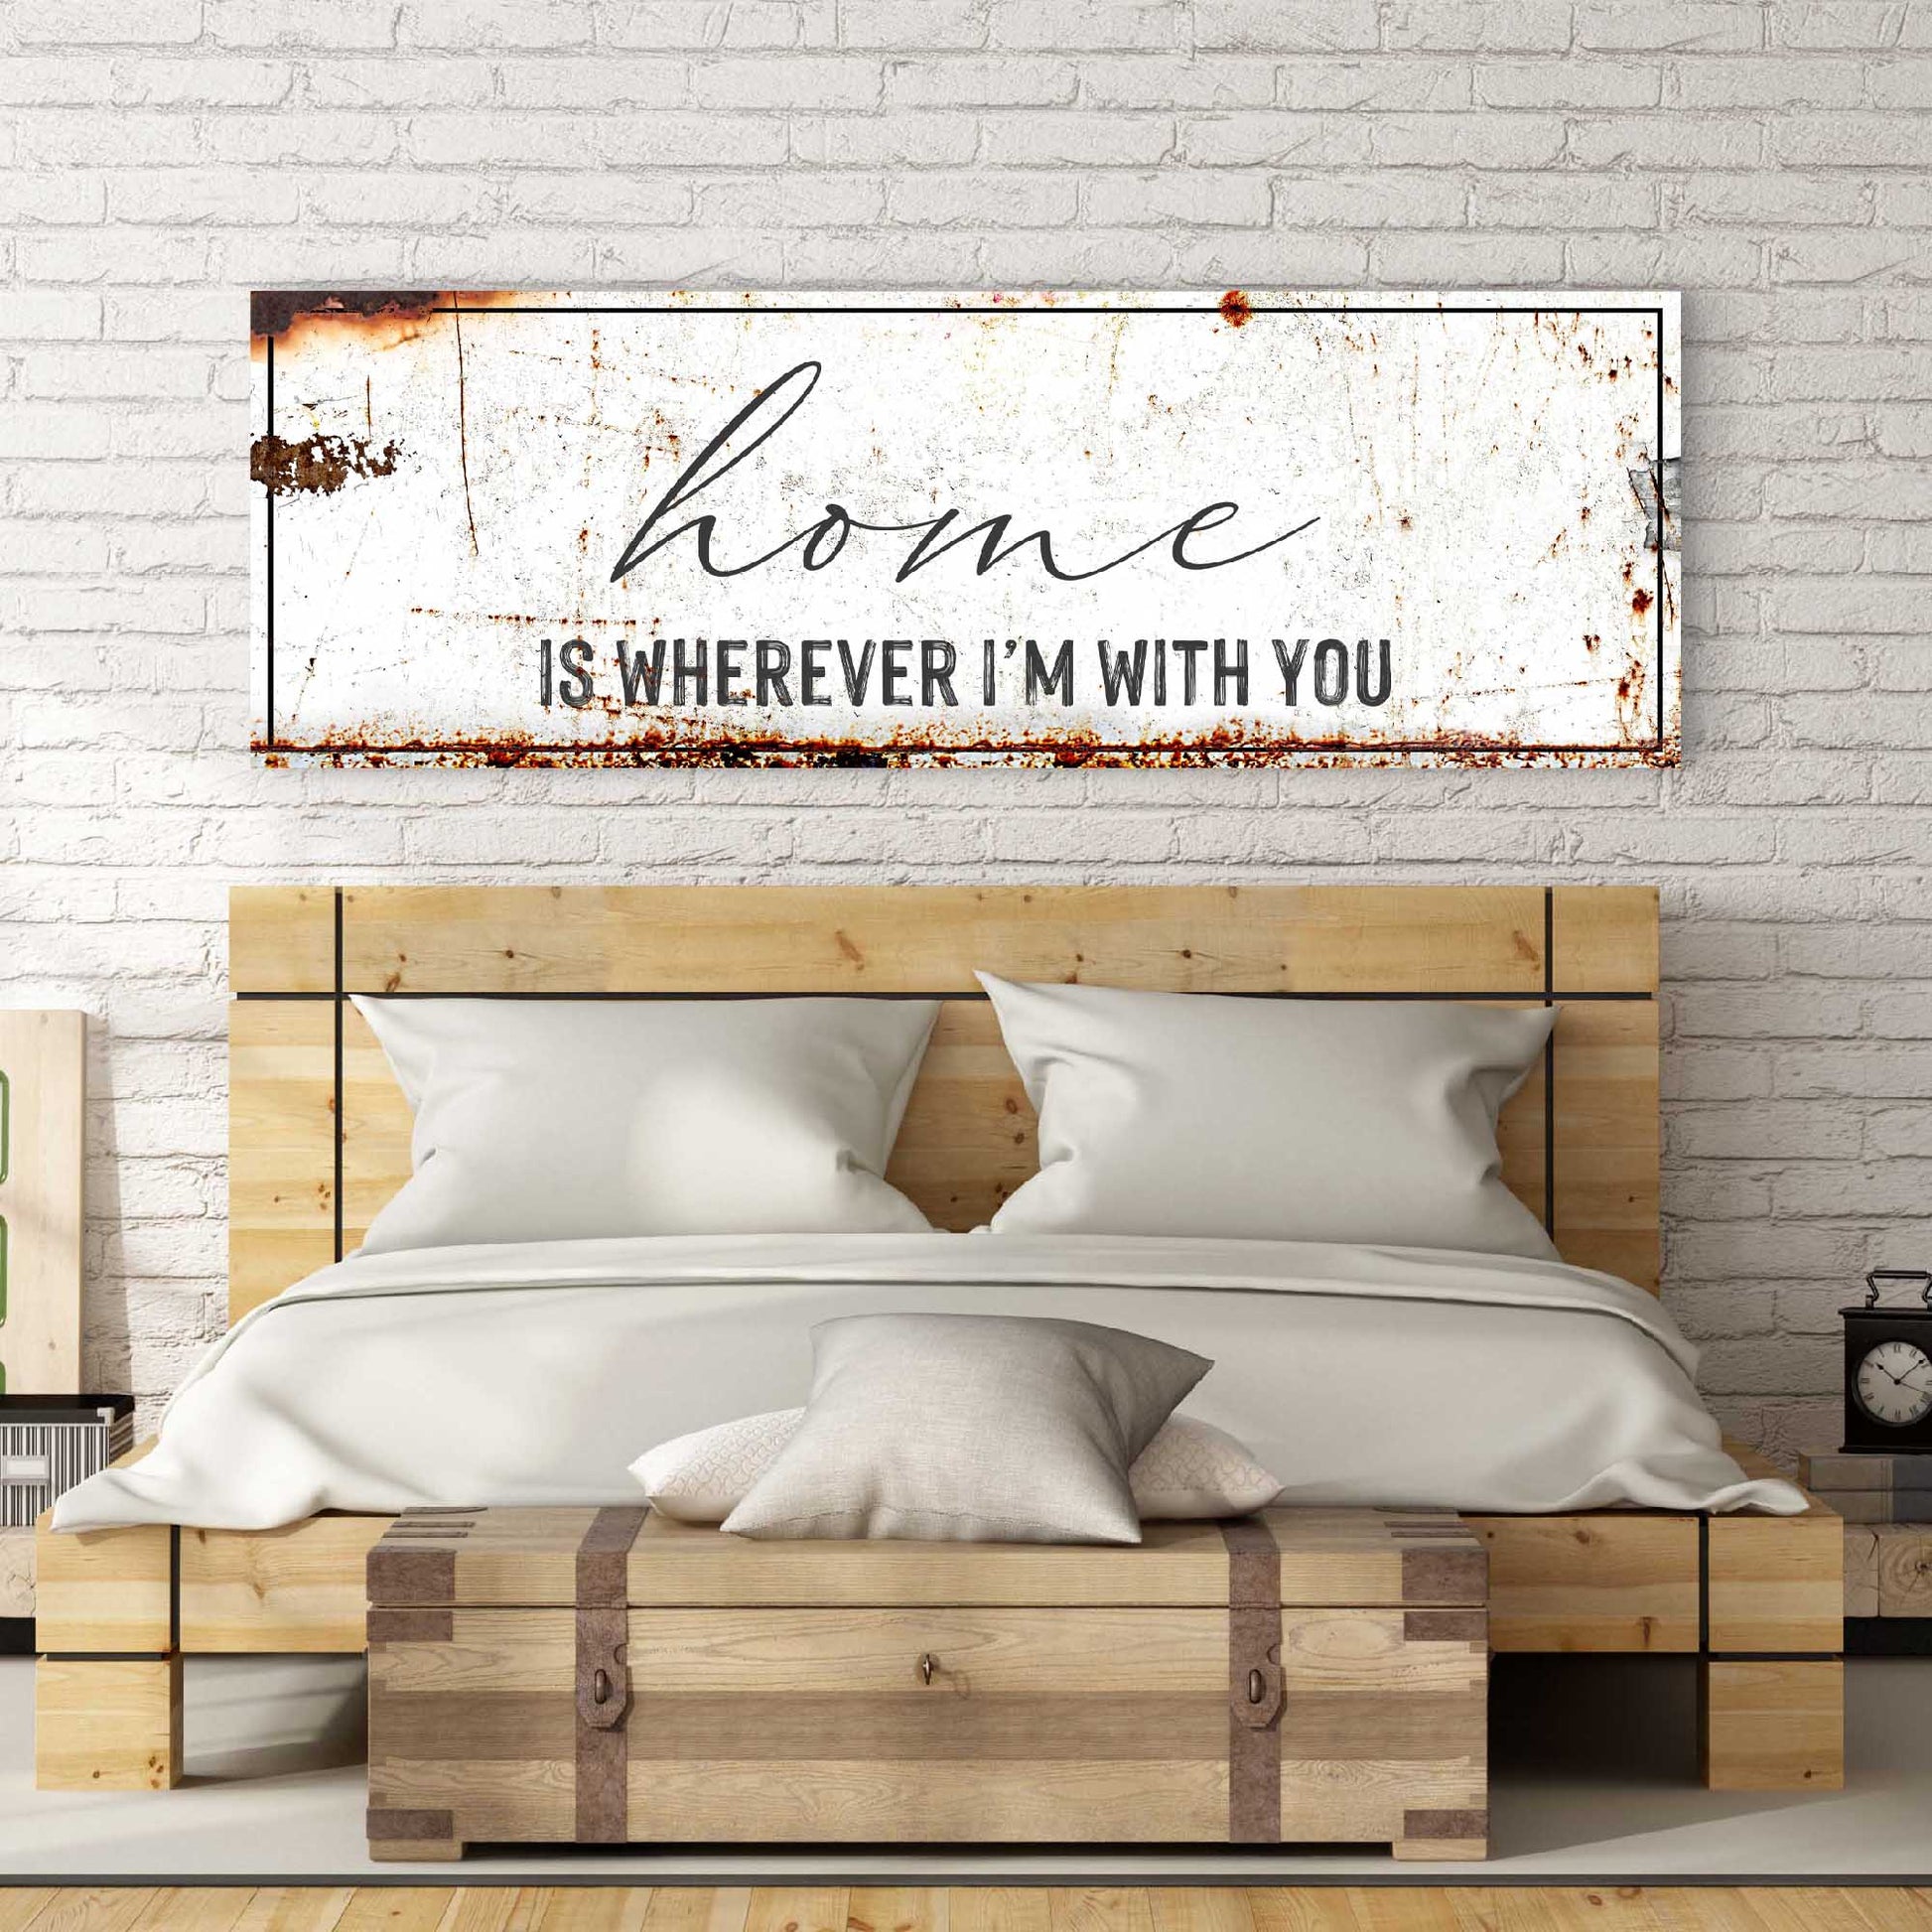 Home is Wherever I'm with You Sign - Image by Tailored Canvases